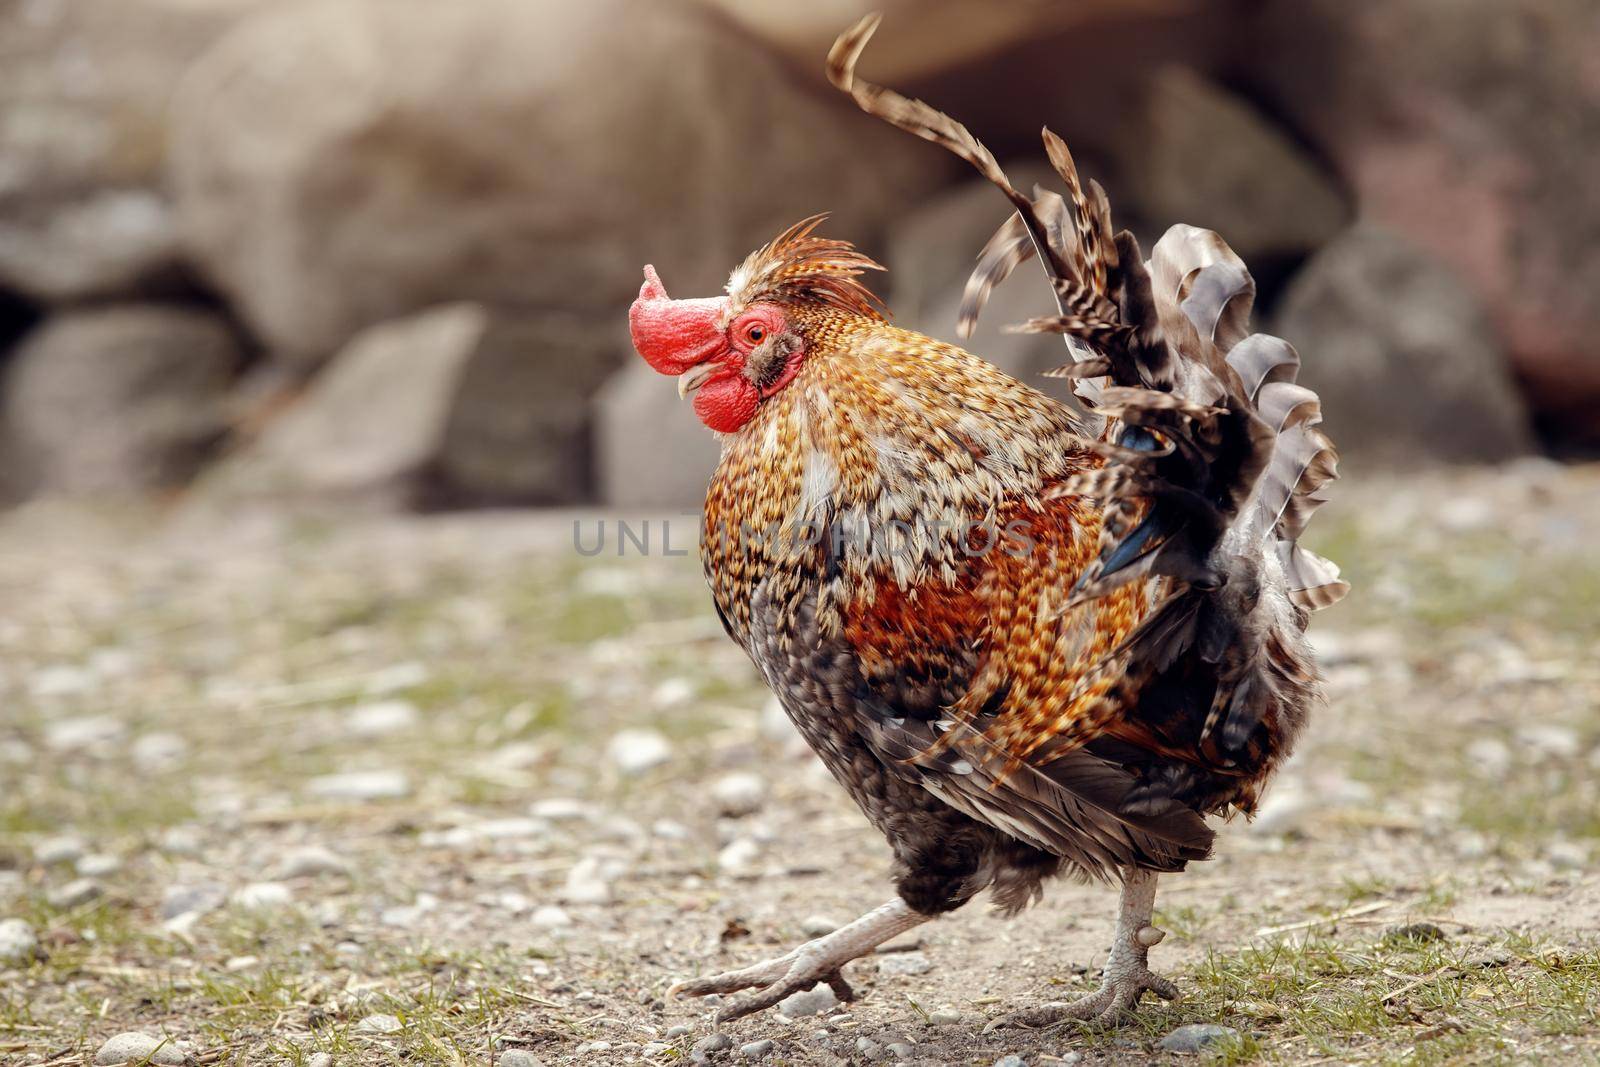 An ancient golden mini rooster walks in the village courtyard.